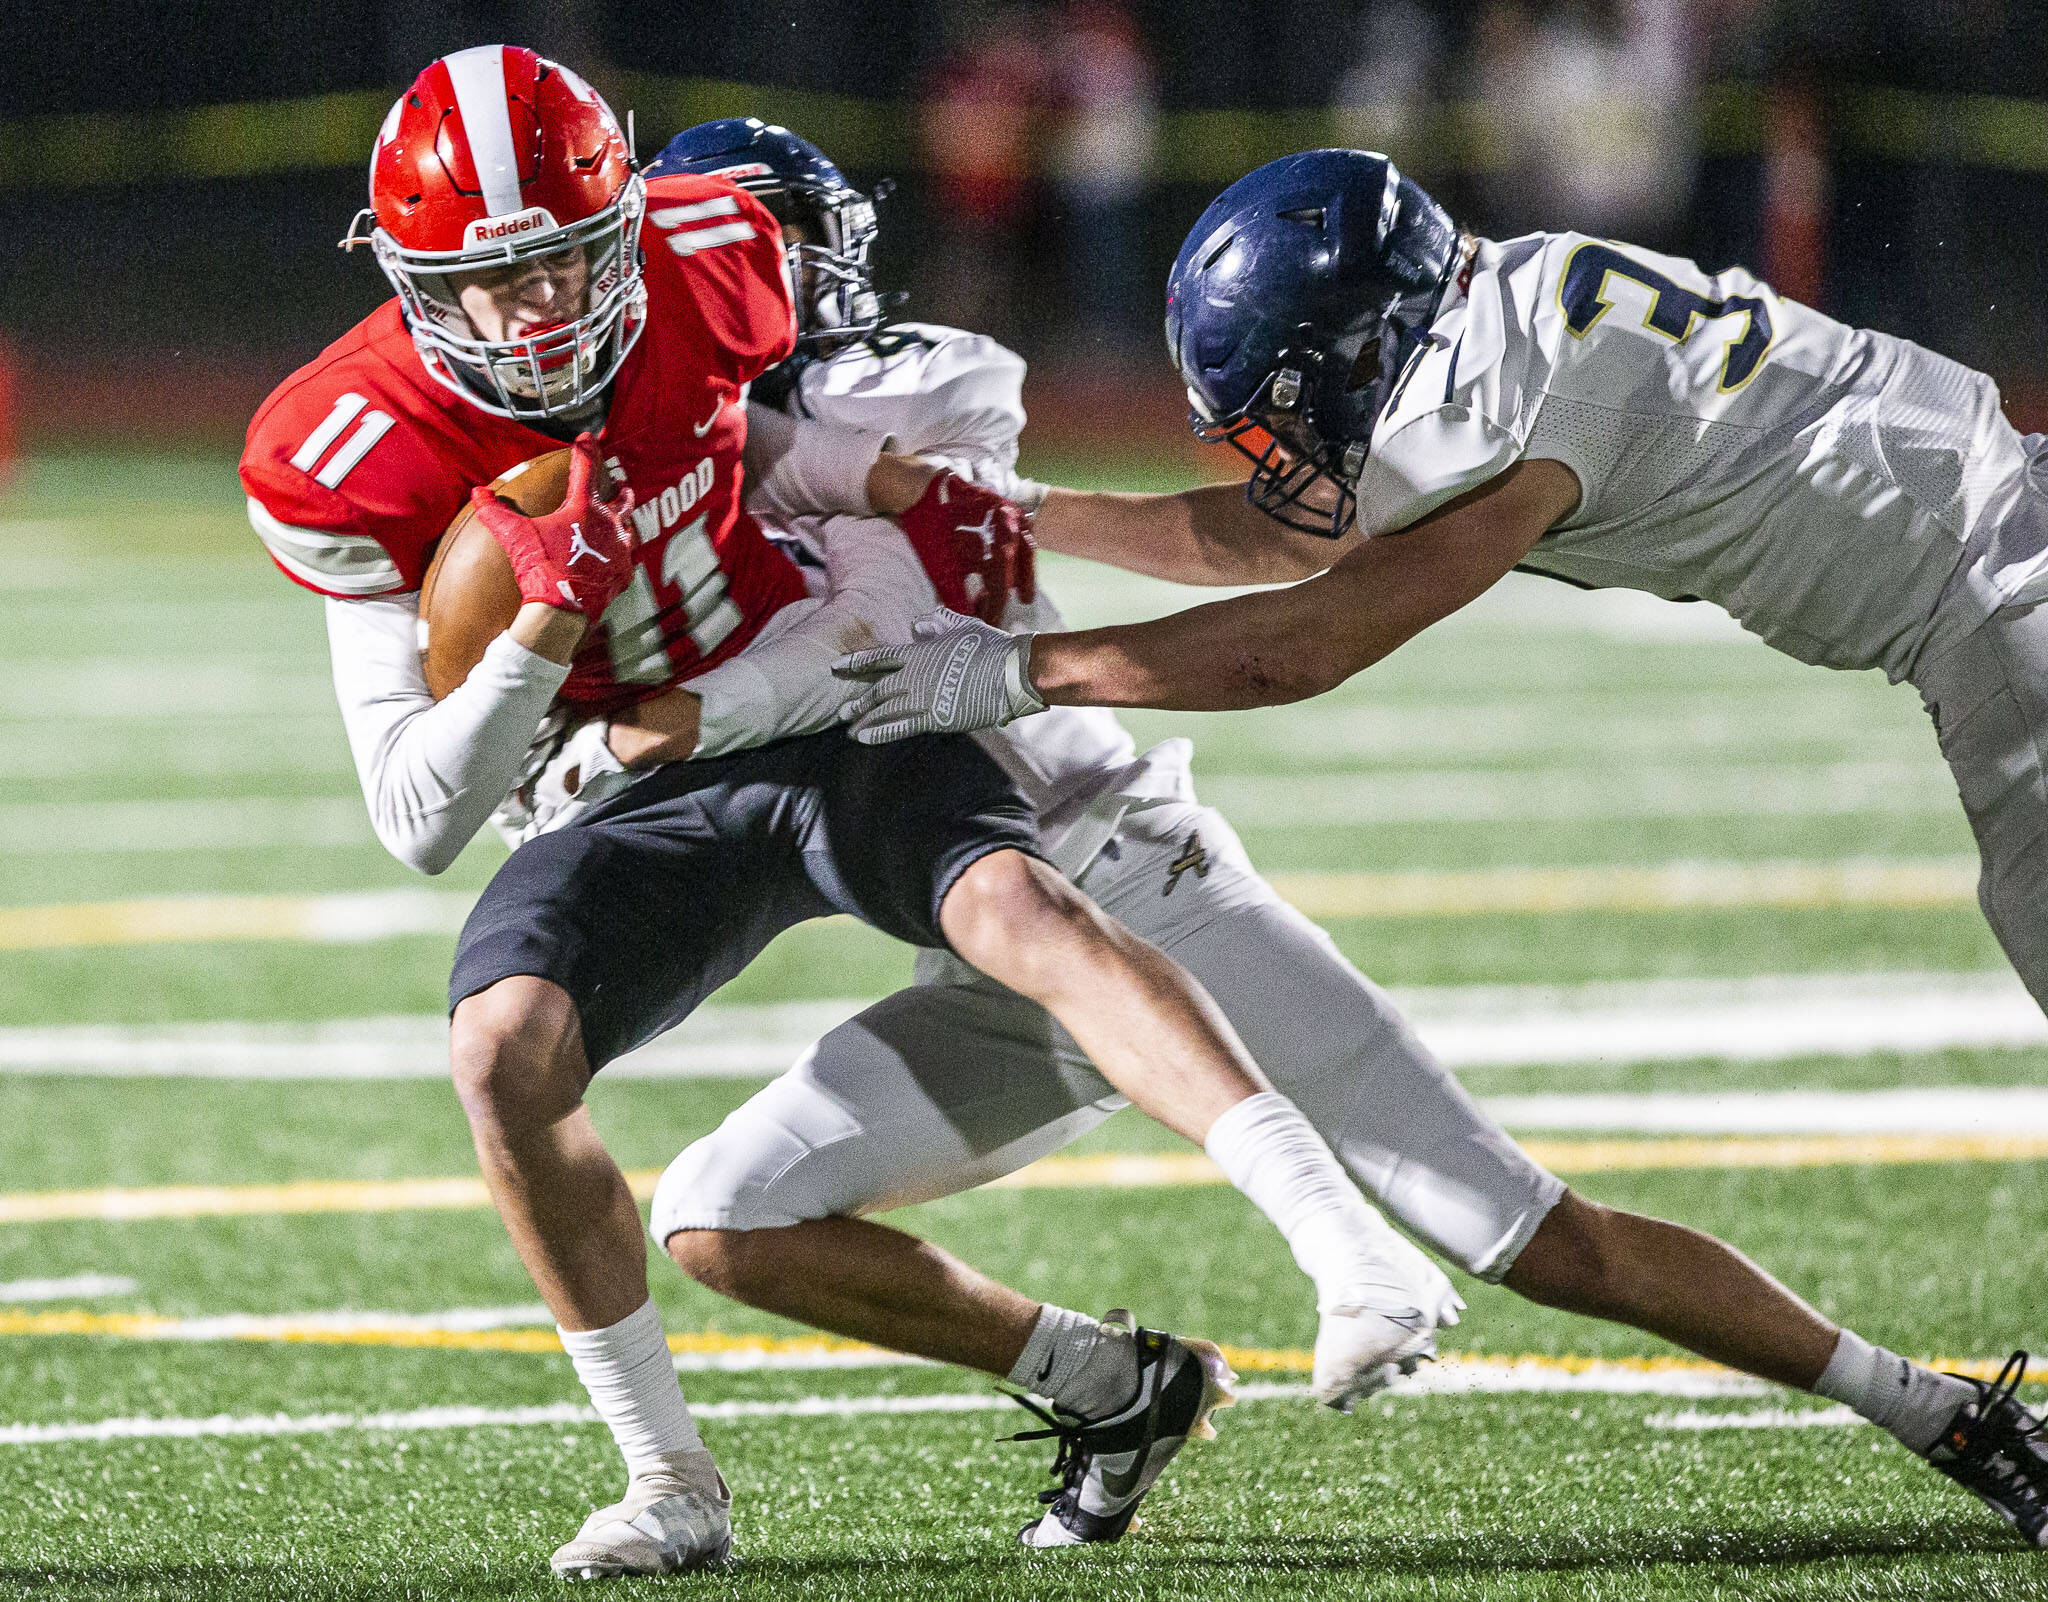 Stanwood’s Elias Caniglia is tackled by Arlington’s Jake Willis during the game on Friday, Sept. 29, 2023 in Stanwood, Washington. (Olivia Vanni / The Herald)